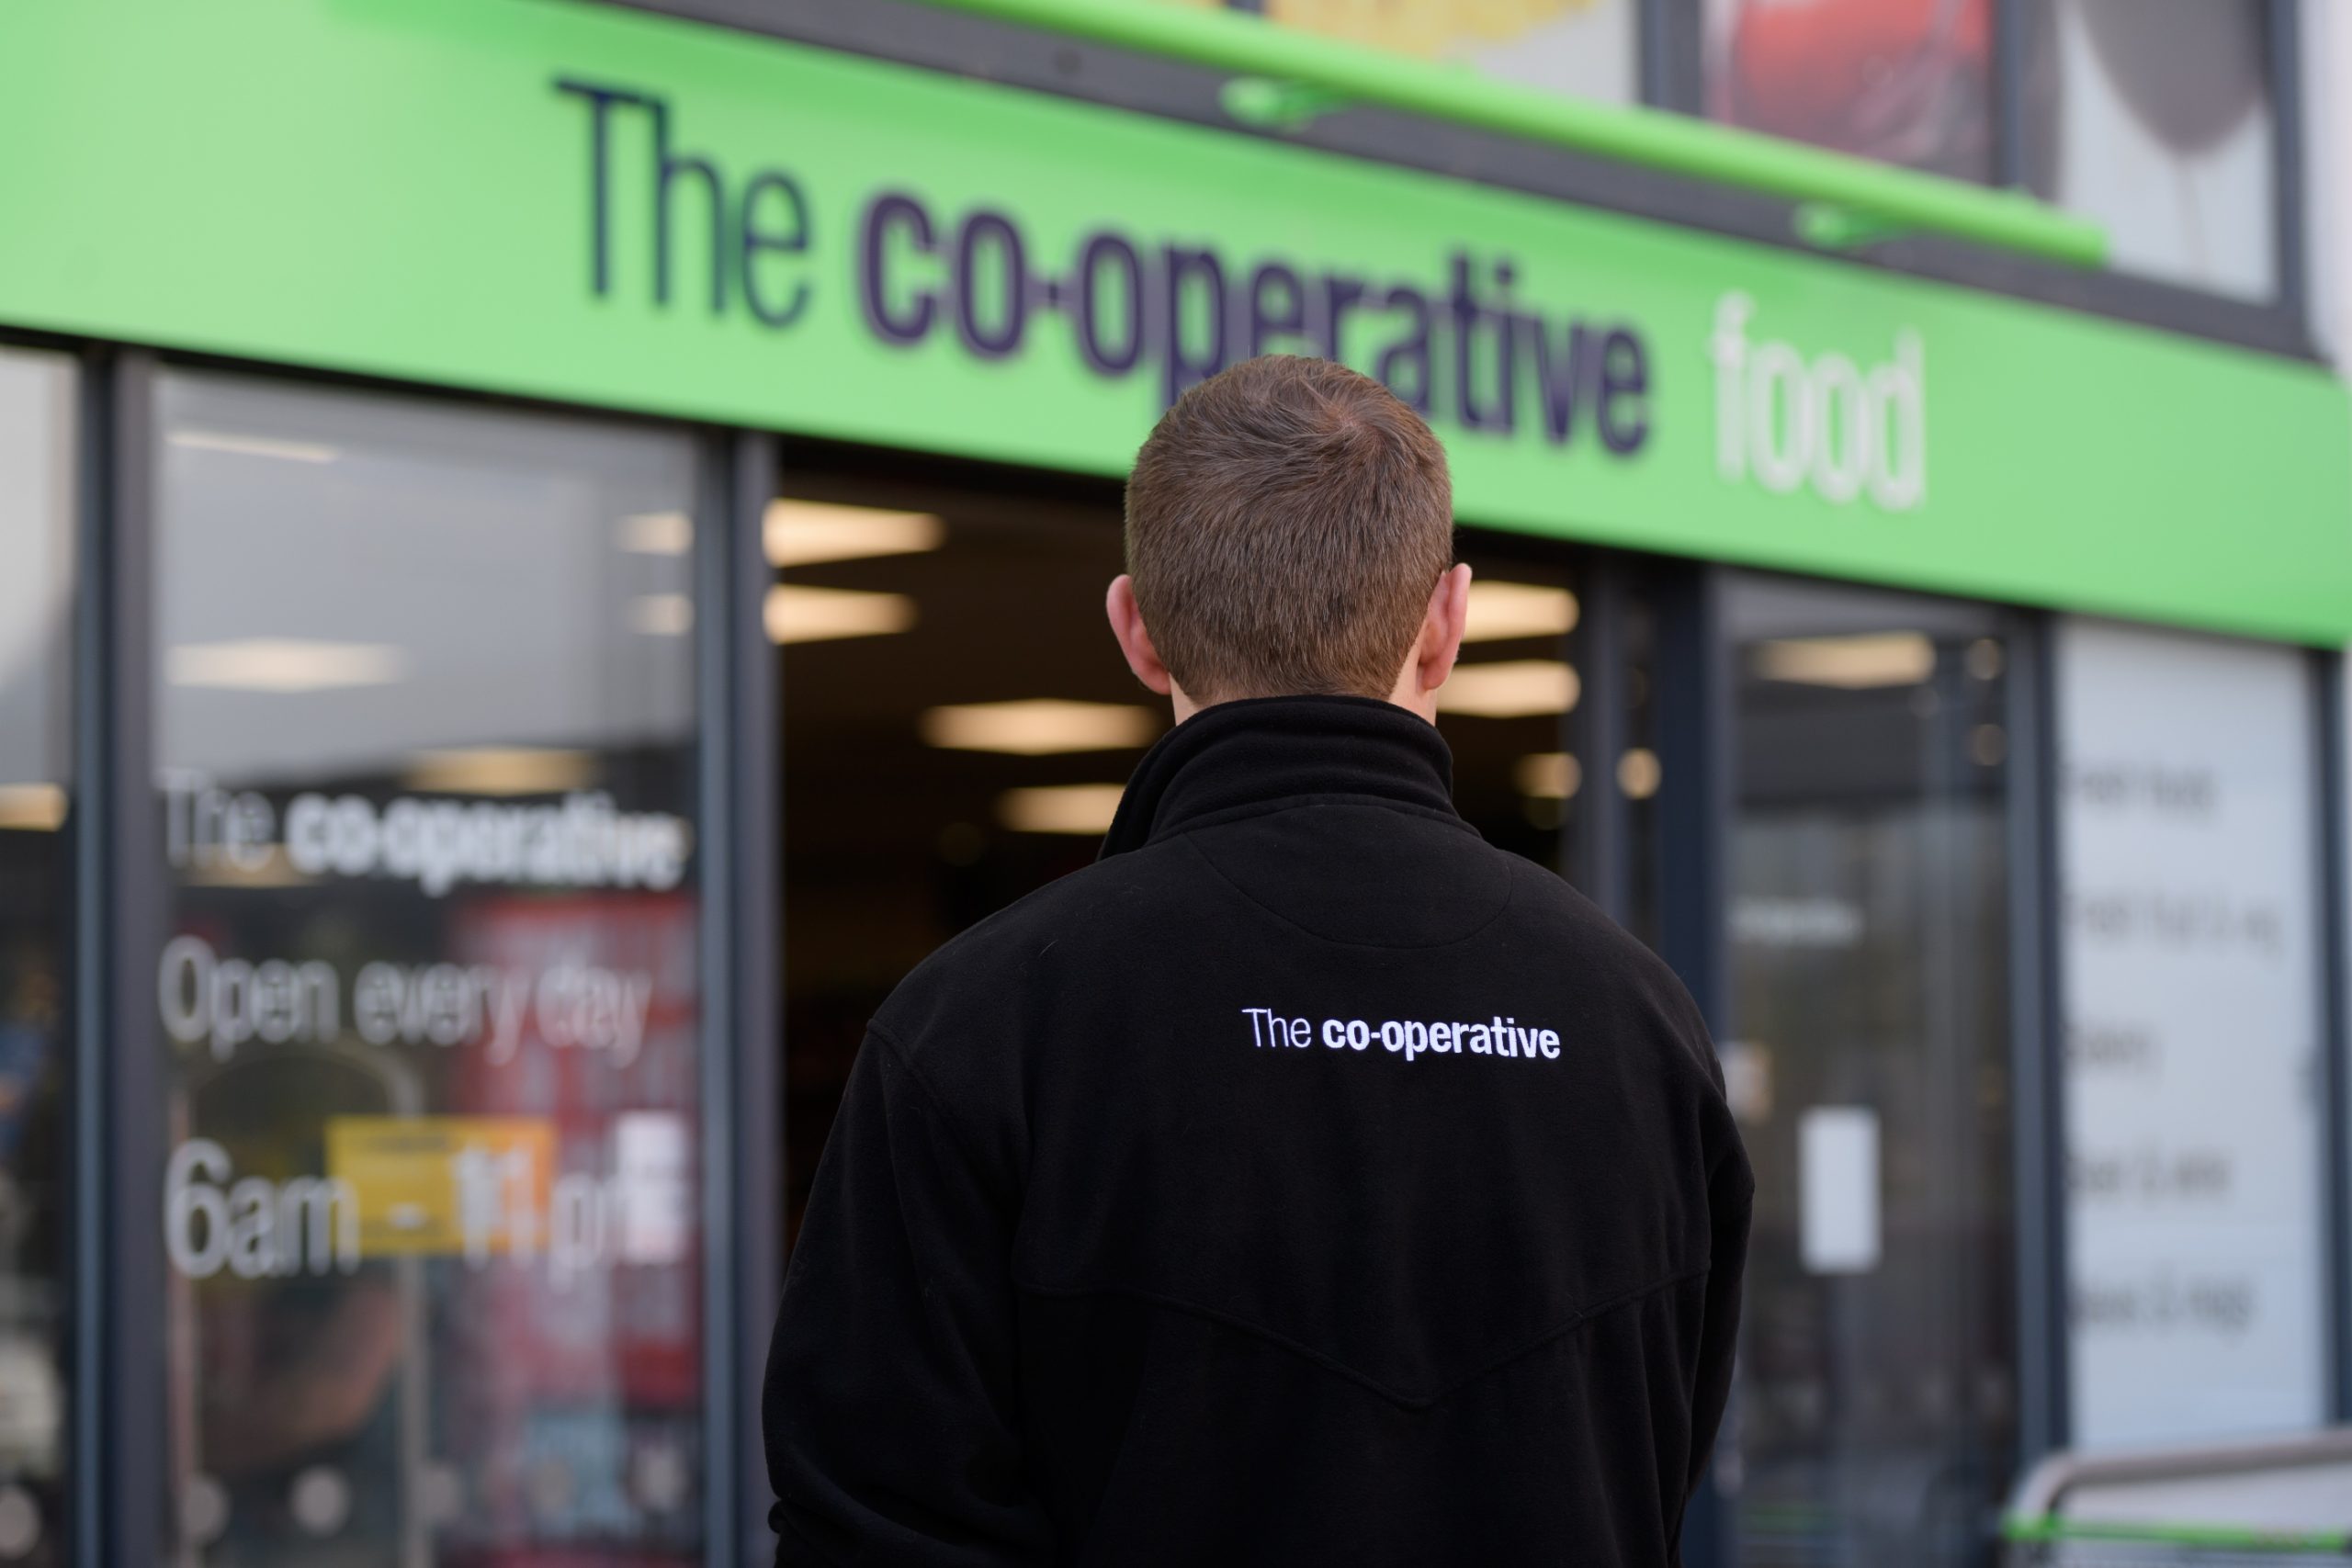 Young people get to climb on the Co-op career ladder